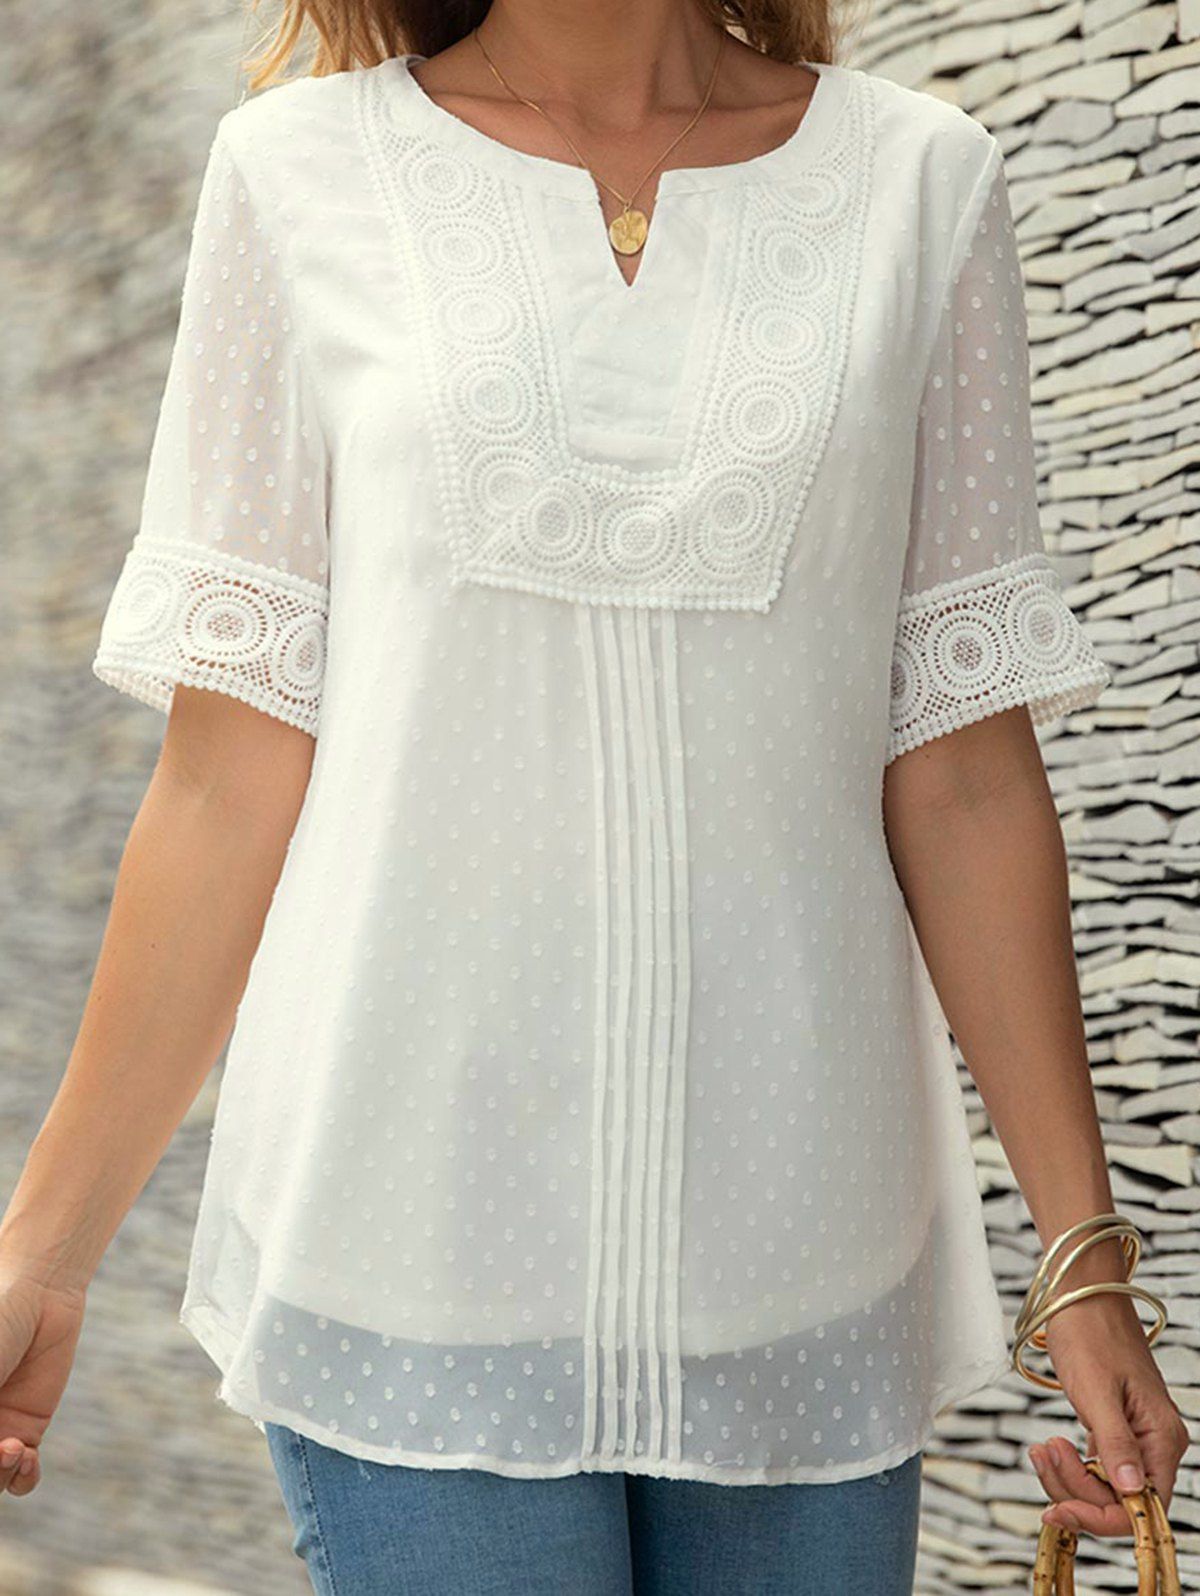 Ethnic Blouse Swiss Dots Stripe Sheer Sleeve Blouse Hollow Out Crochet Lace Notched Top - WHITE L